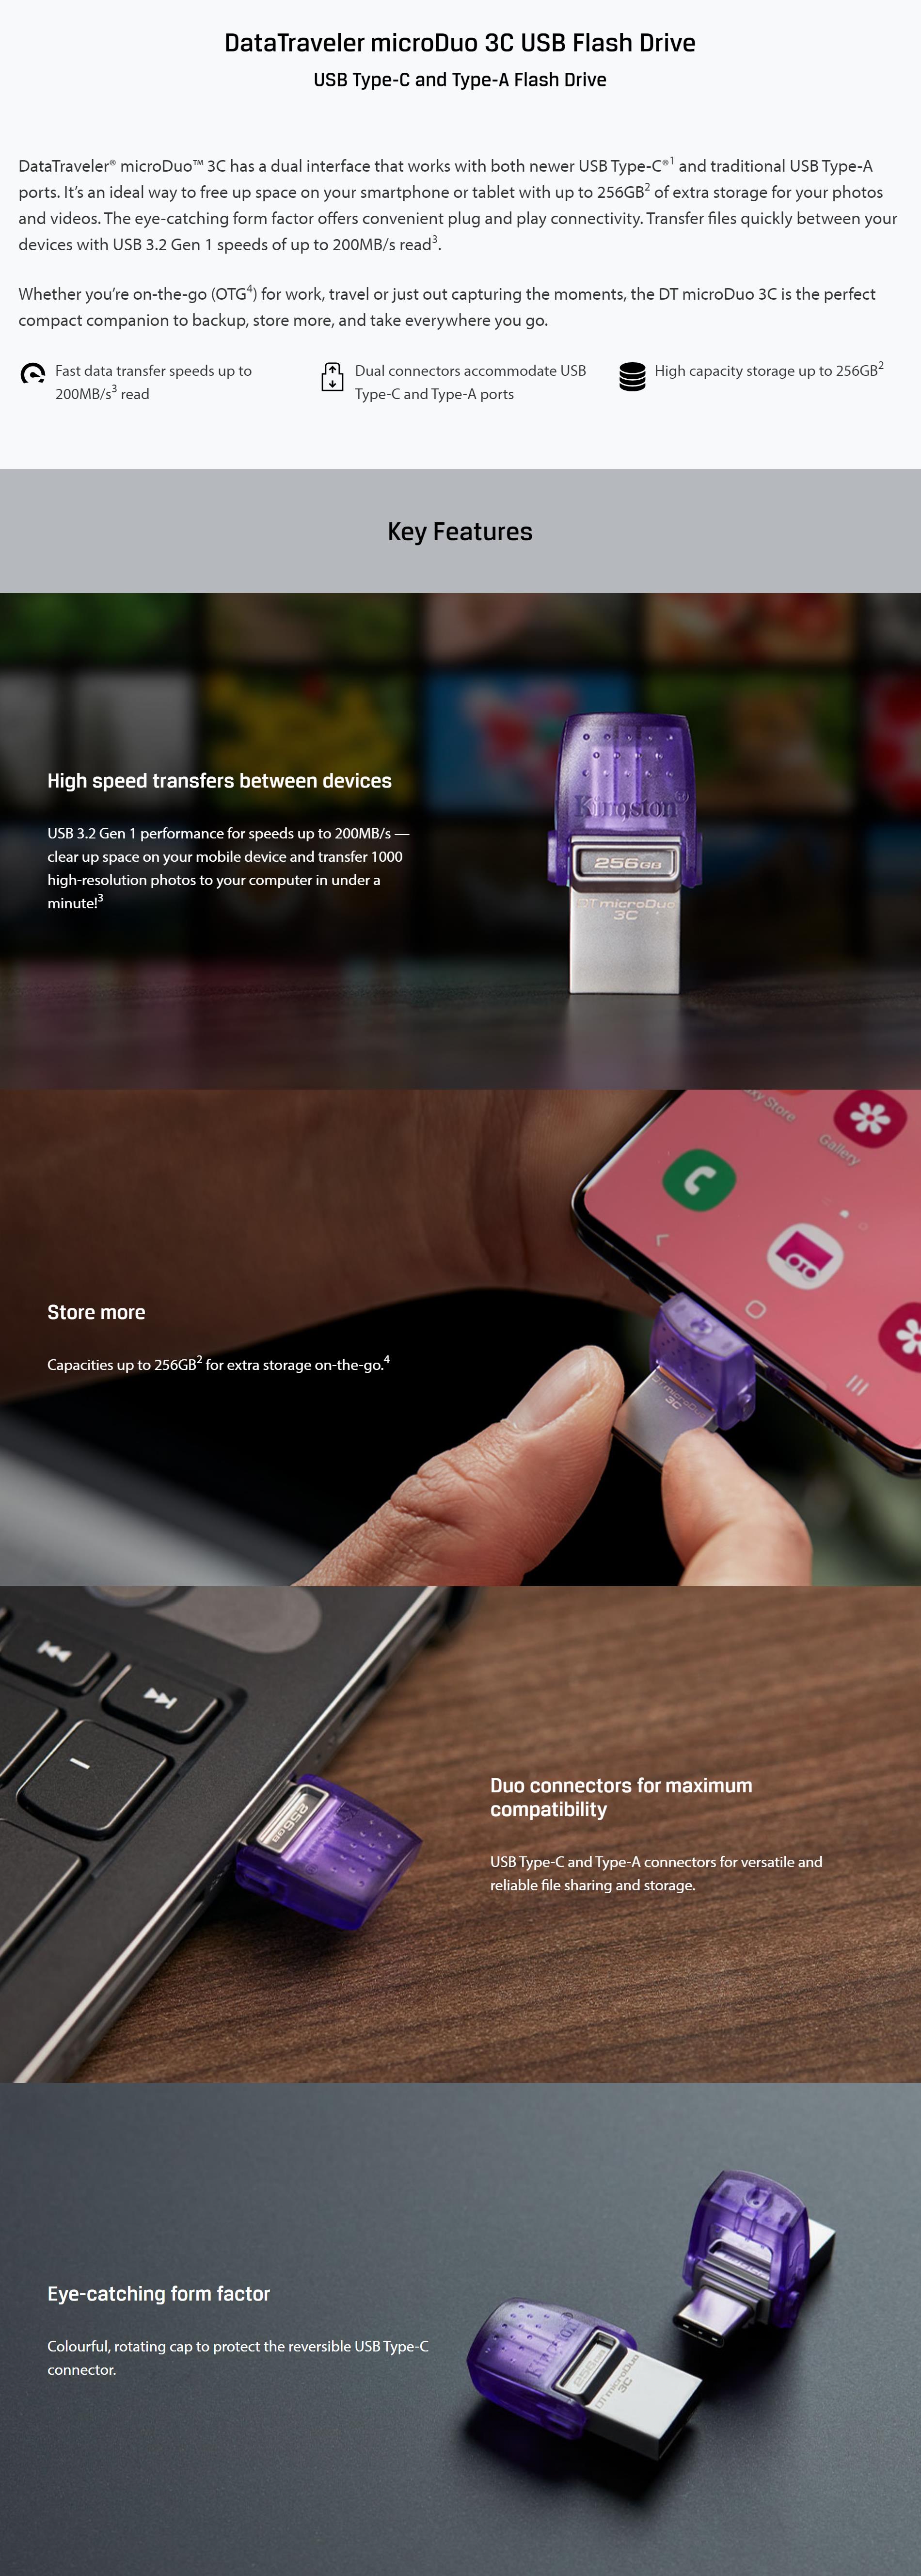 A large marketing image providing additional information about the product Kingston DataTraveler microDuo 3C USB 64GB Flash Drive - Additional alt info not provided